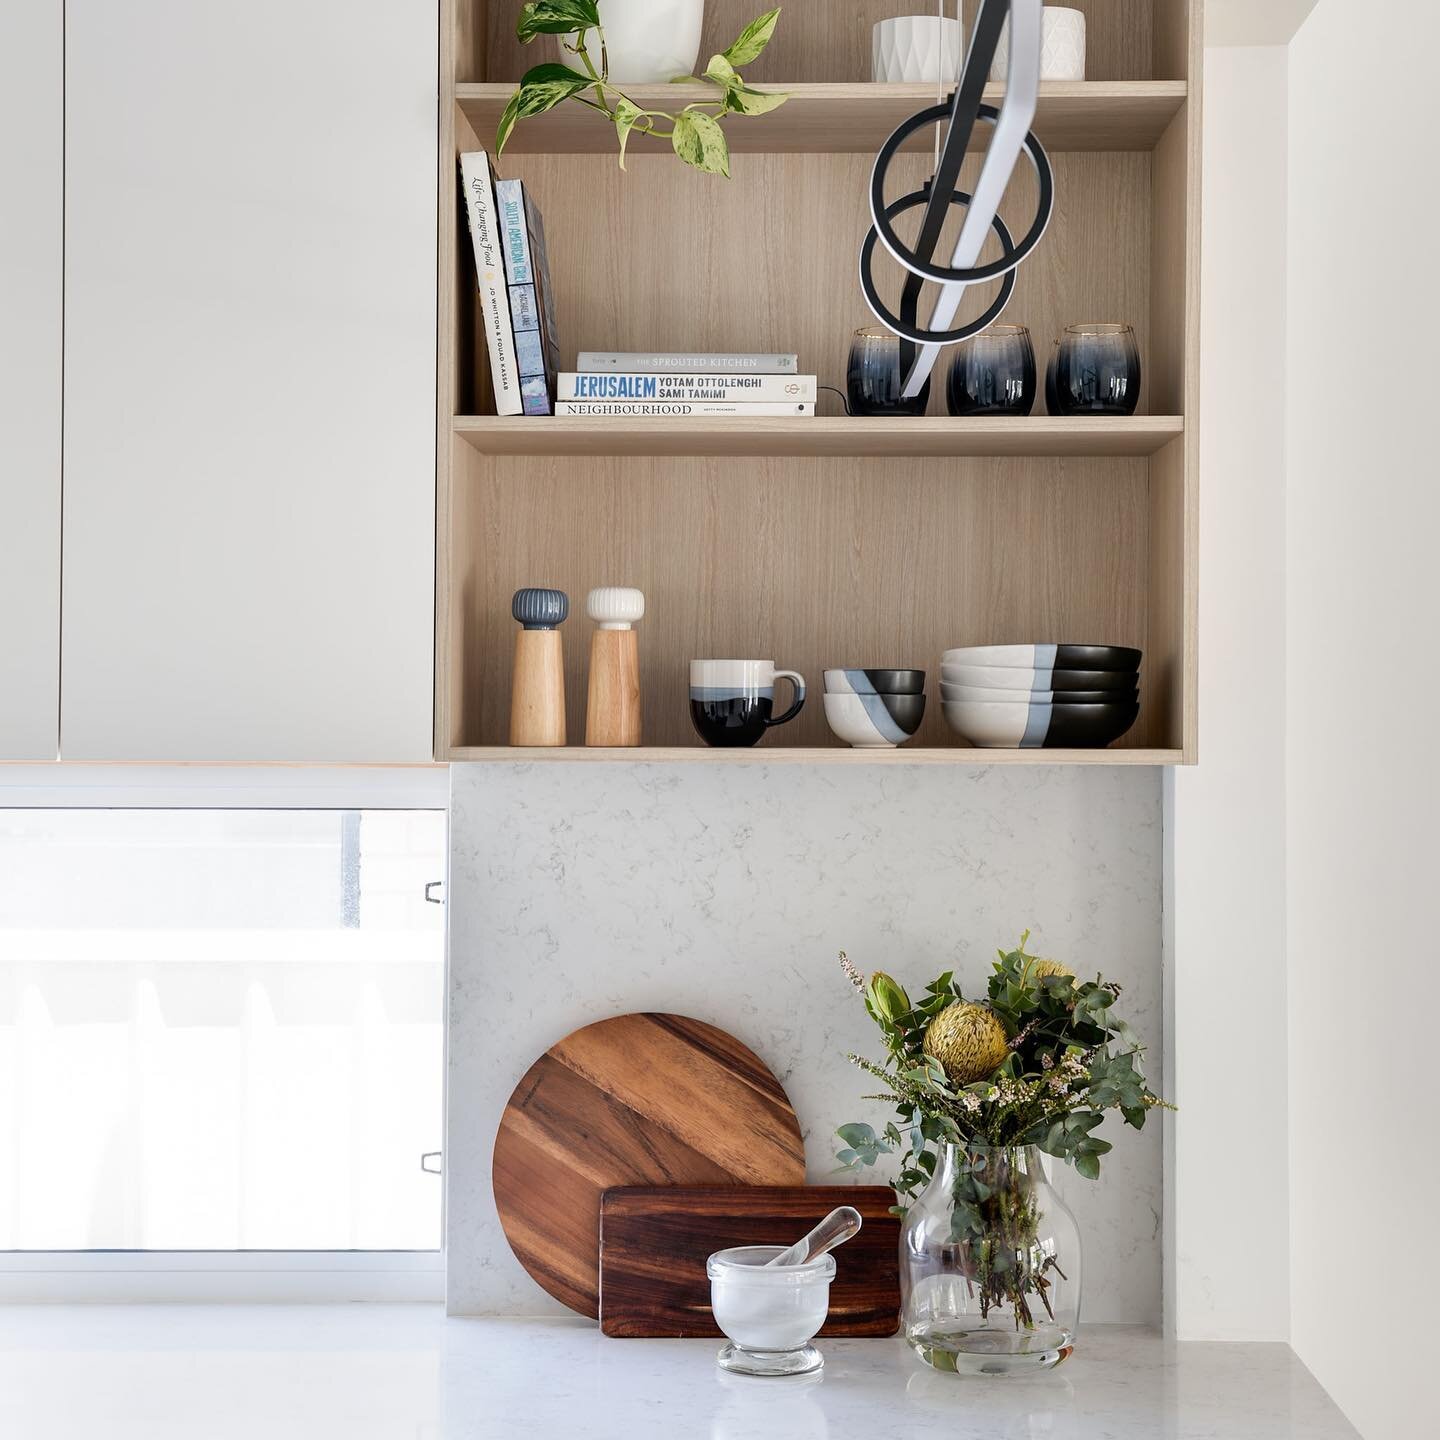 A functional kitchen can make cooking a pleasure.  How can I help you create your dream kitchen??
#perthinteriordesign #perthkitchen #perthkitchens #kitchendesign #interiordesign.  Photos @carla_atley